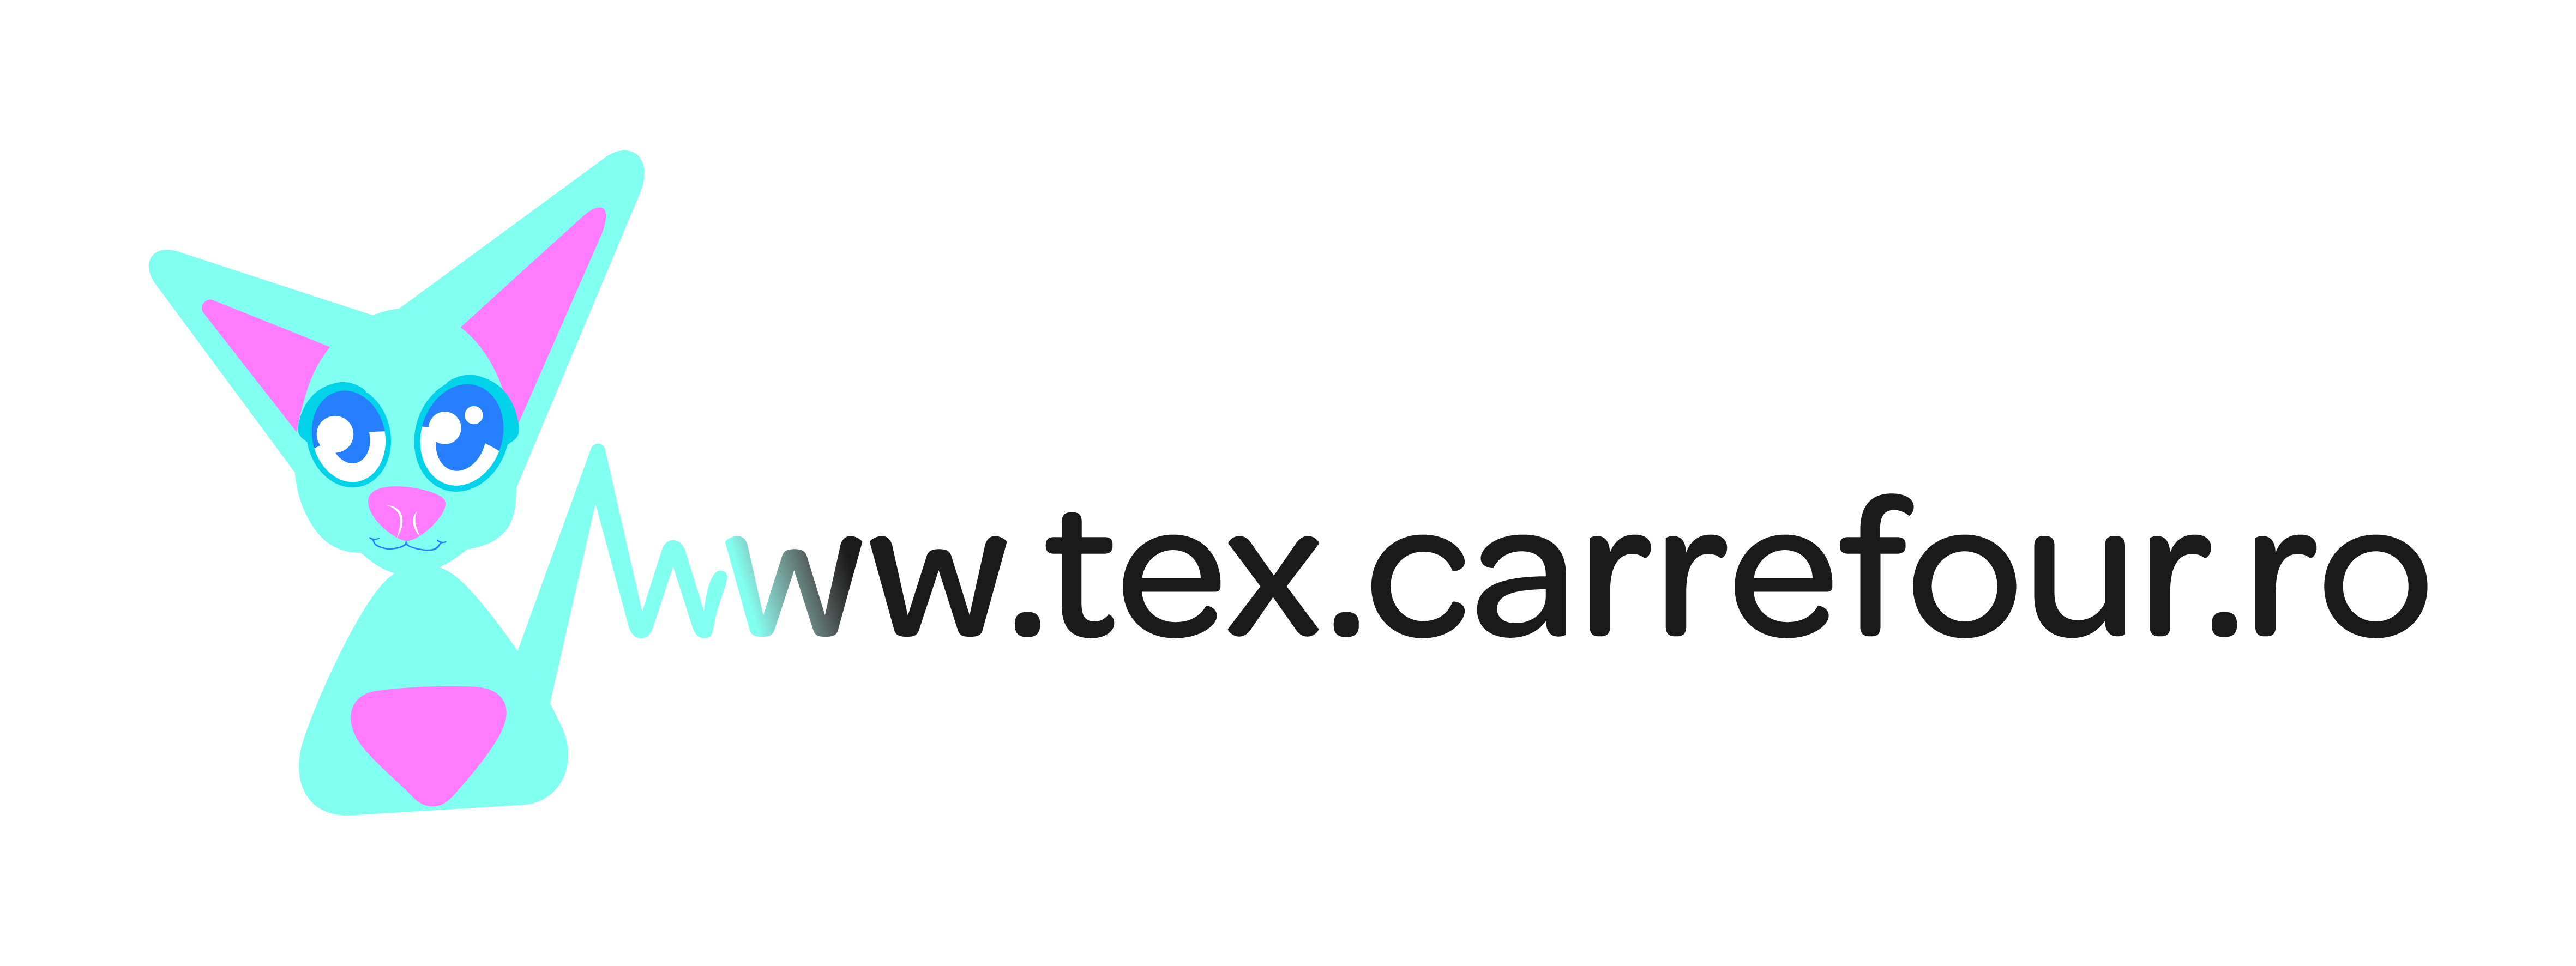 http://www.tex.carrefour.ro/